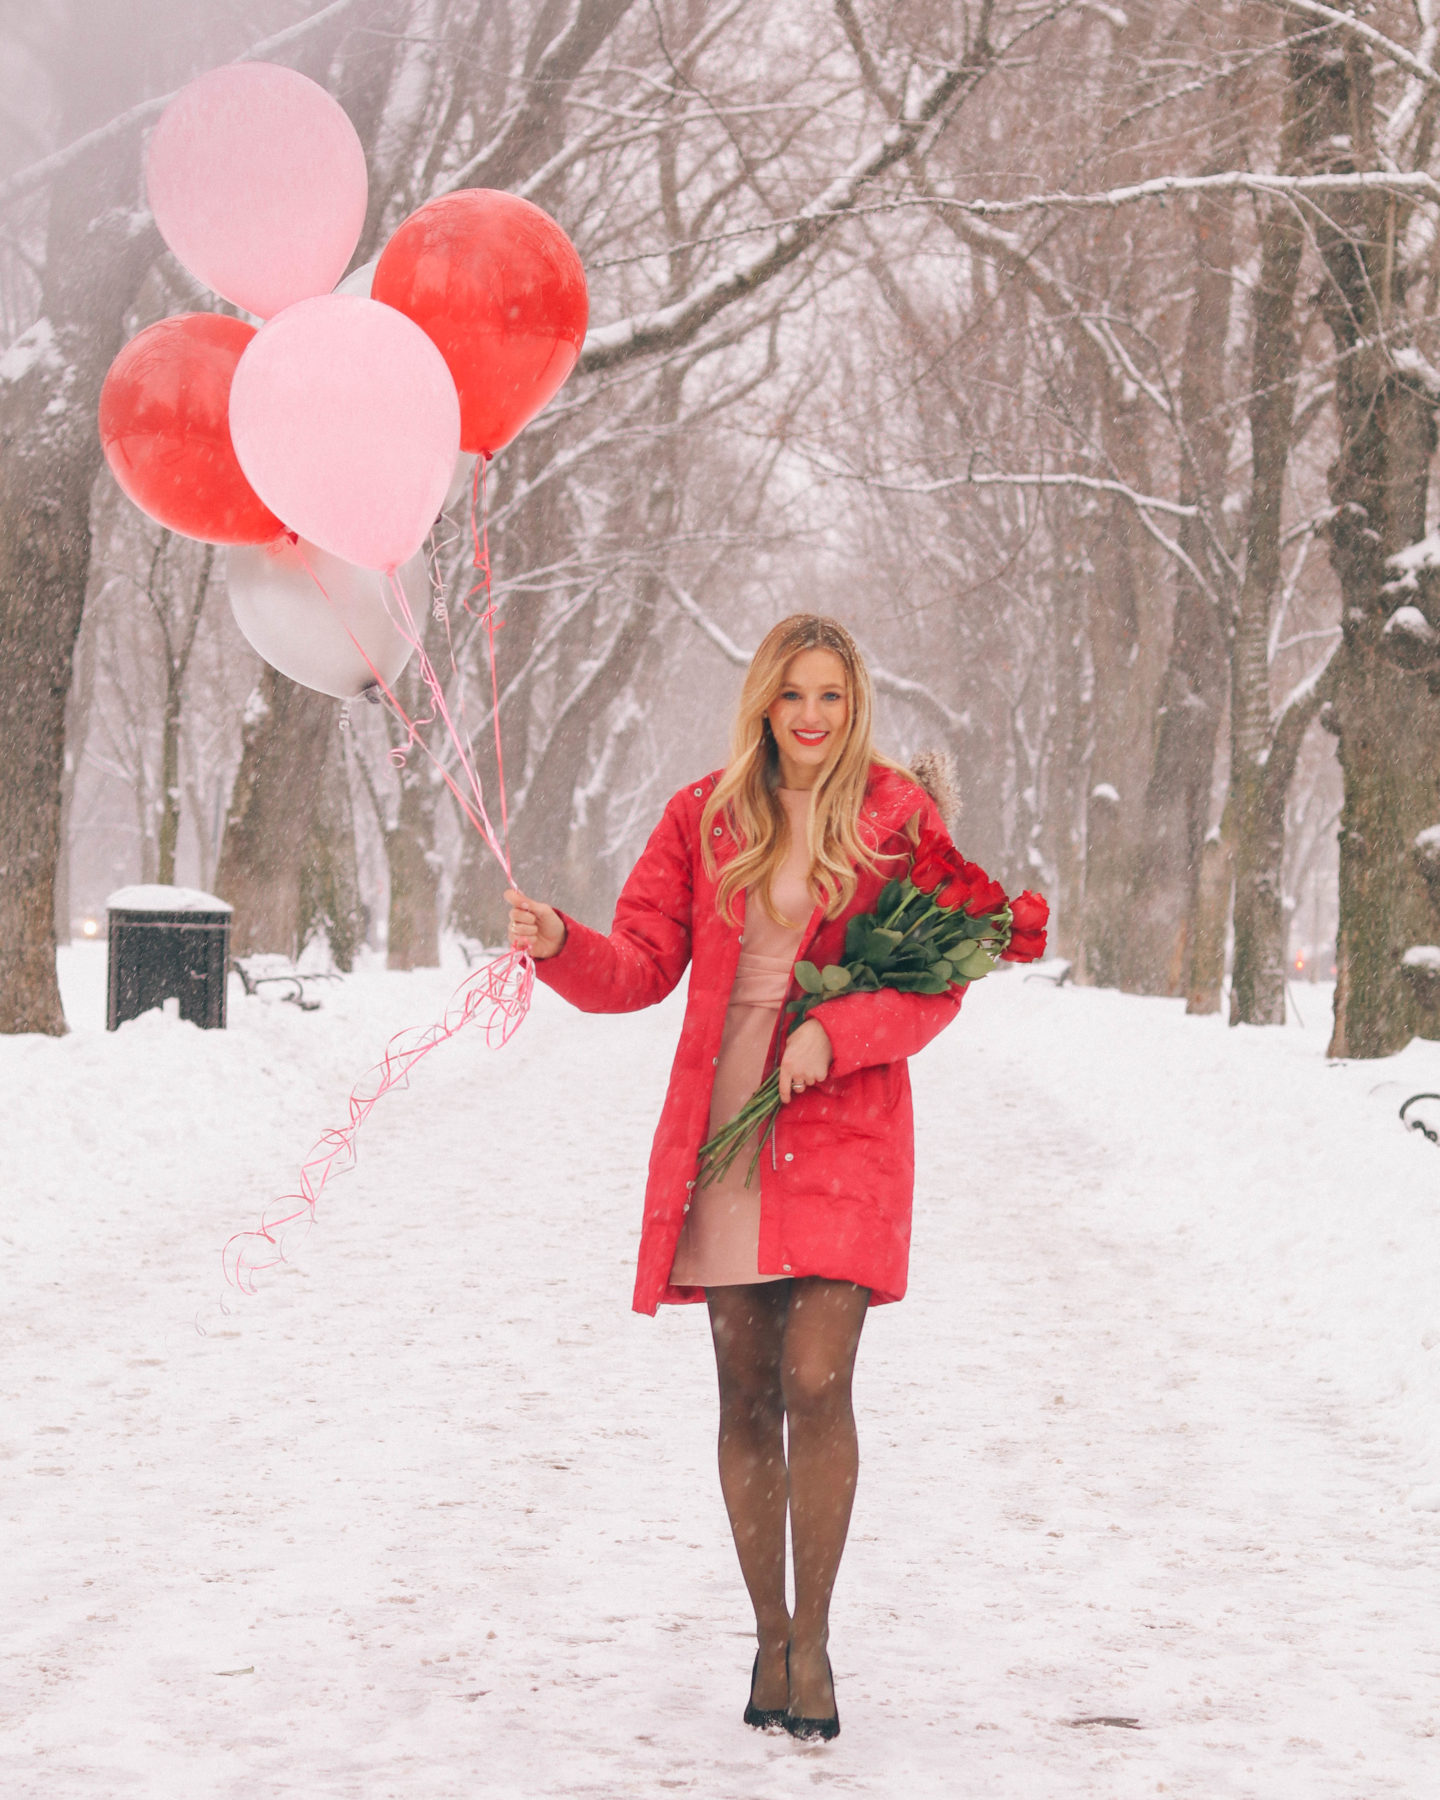 14 valentine's day date ideas for that someone special and your bestie